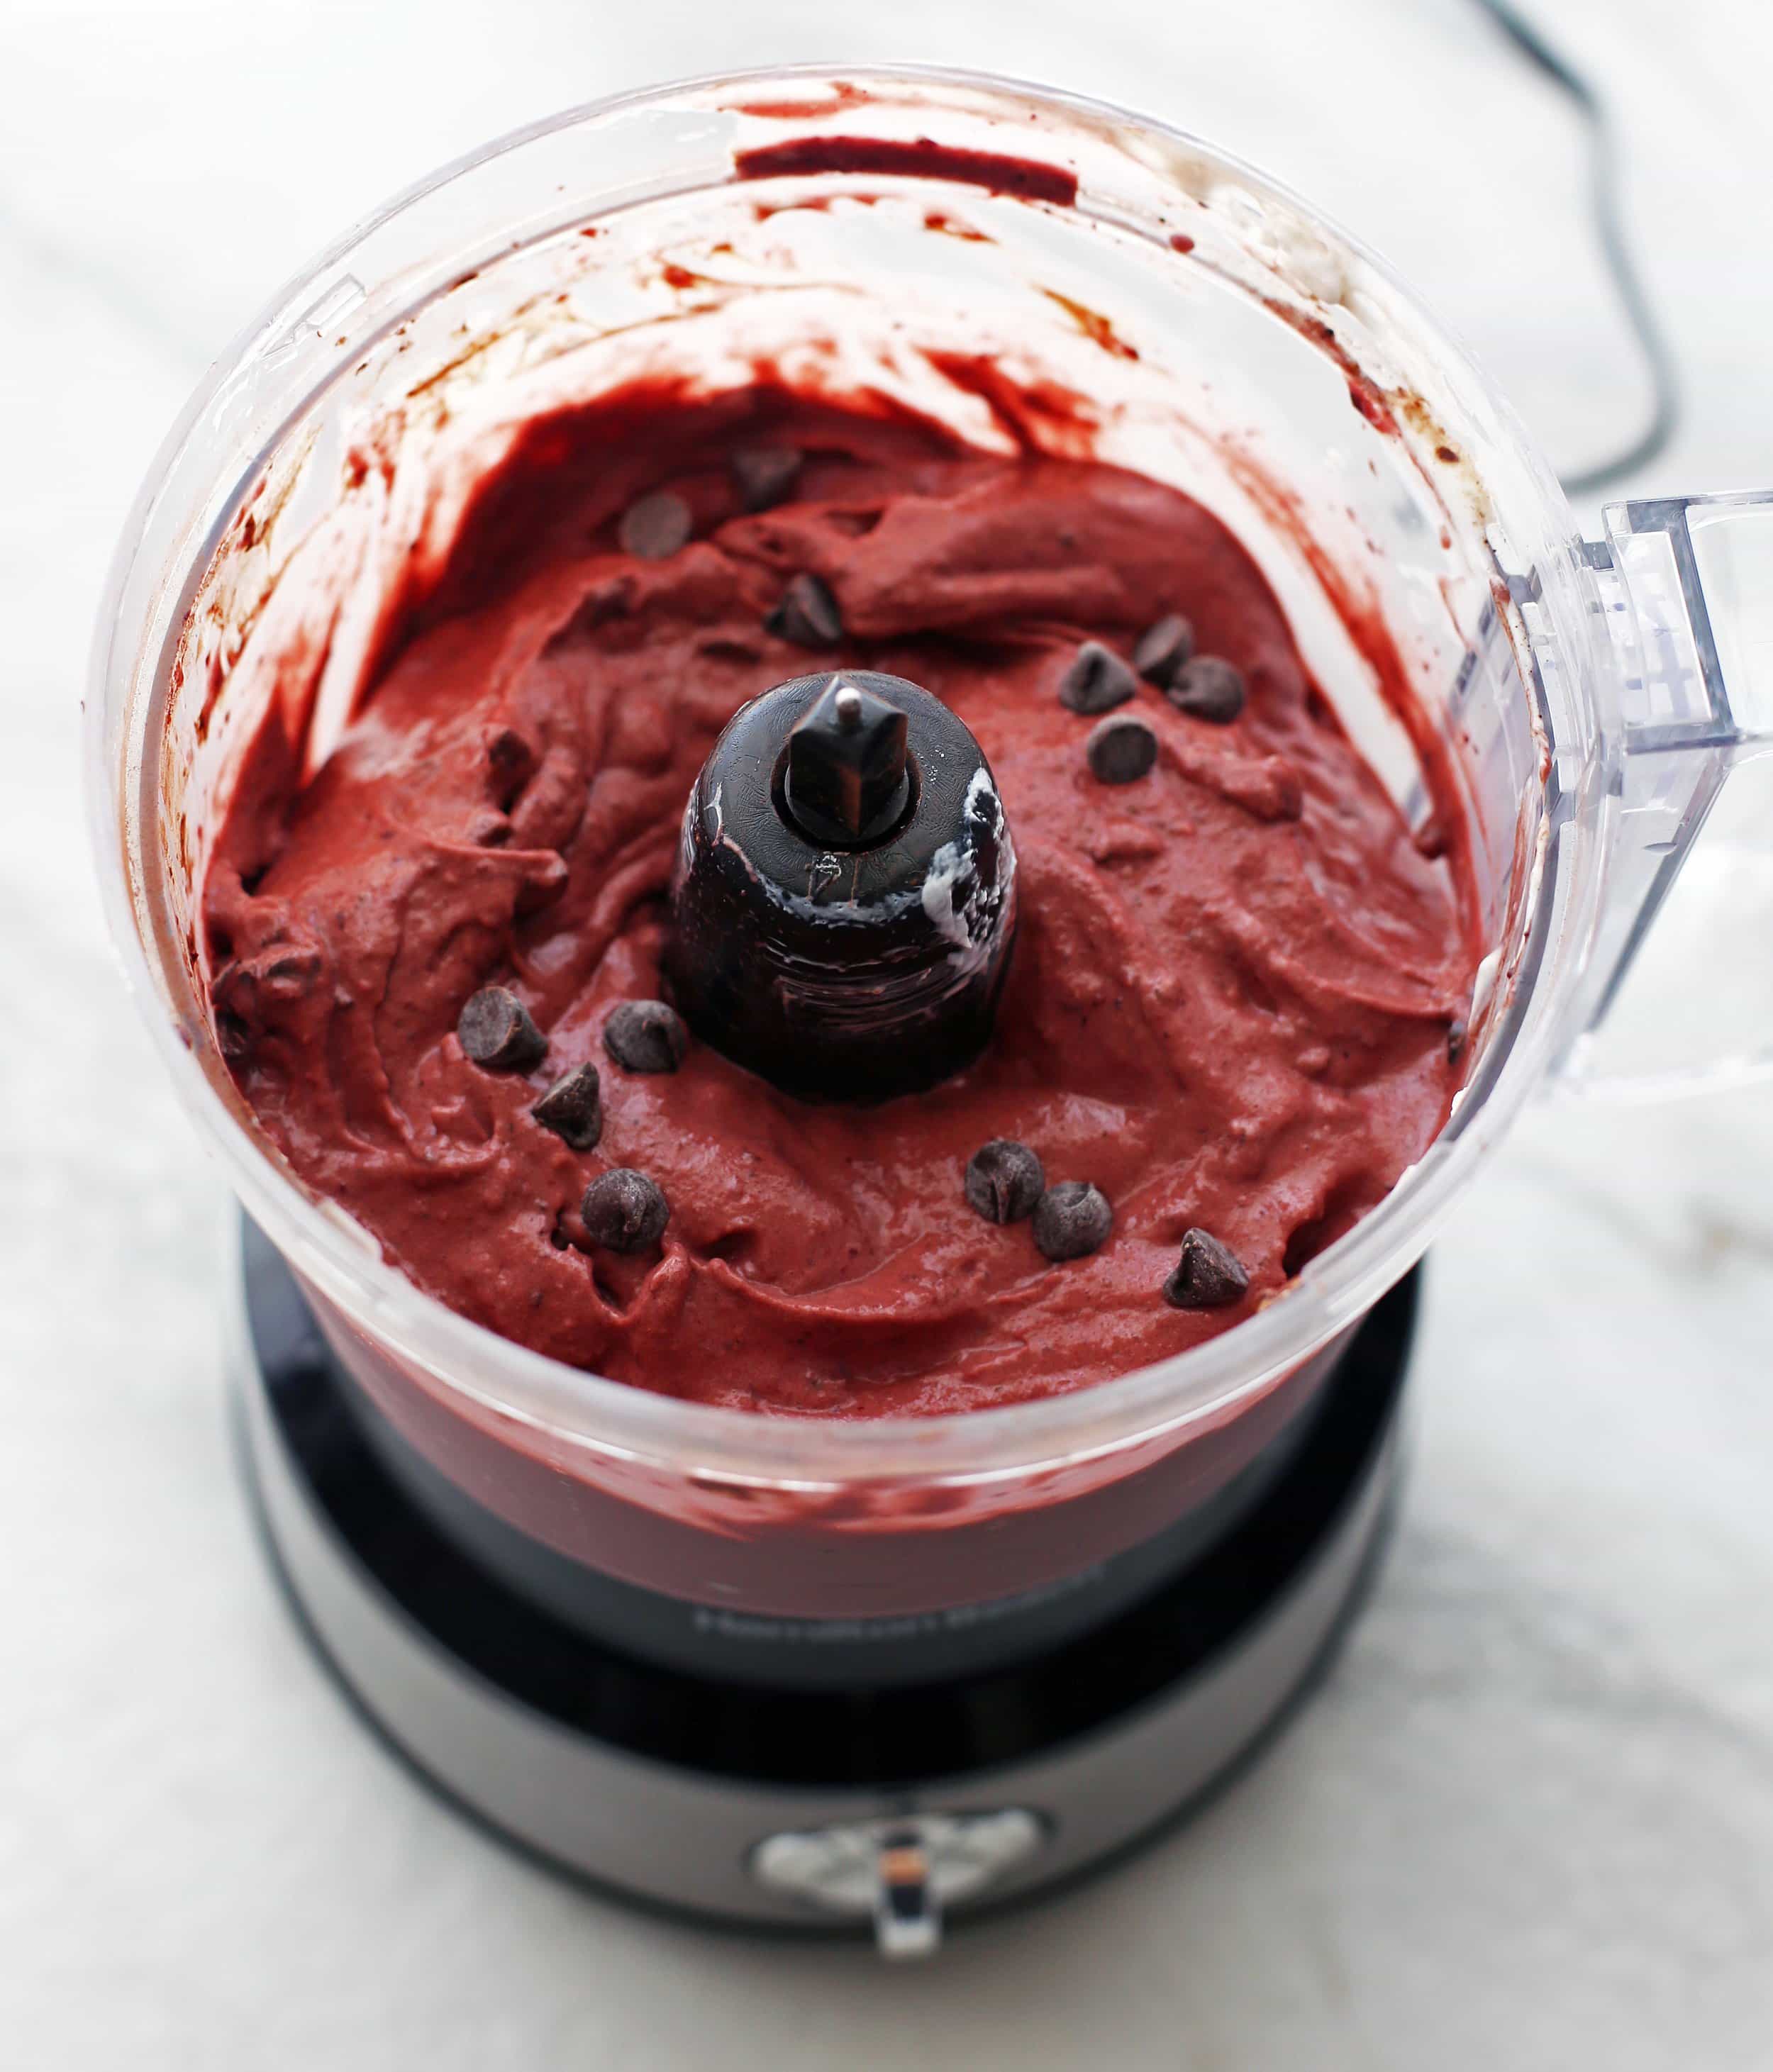 Creamy cherry chocolate frozen yogurt with chocolate chips in a food processor.